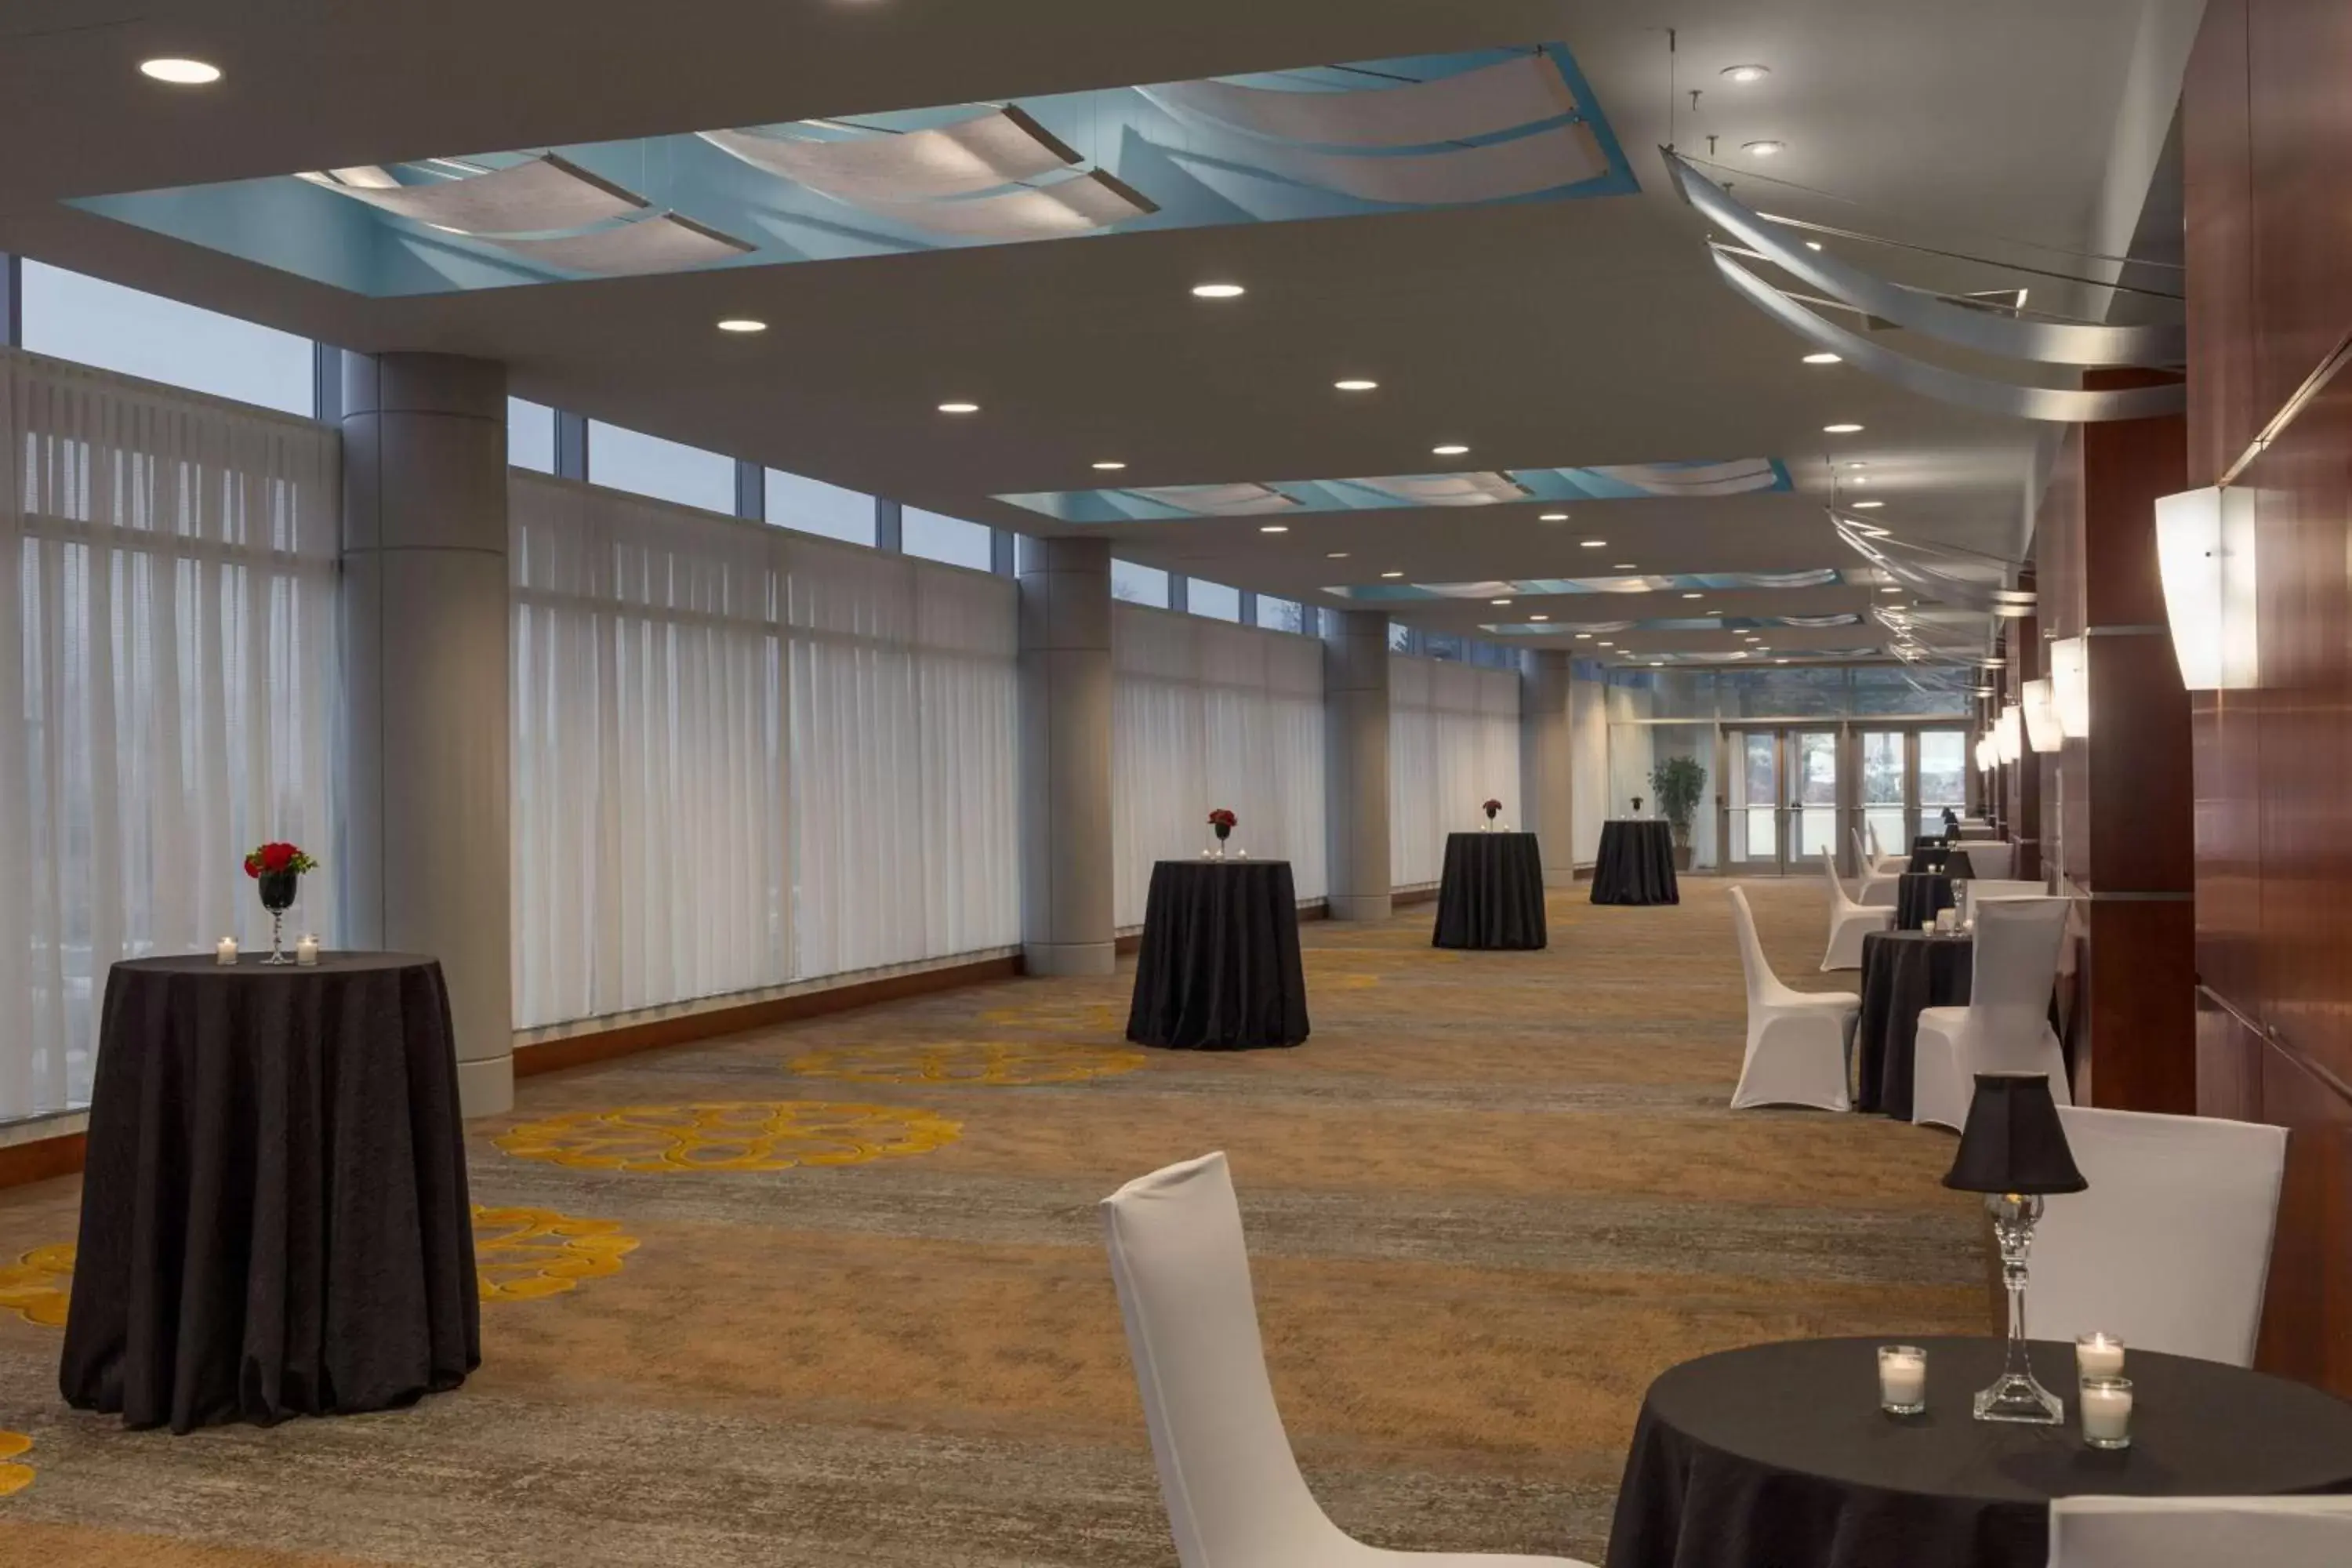 Meeting/conference room, Banquet Facilities in Hilton Baltimore BWI Airport